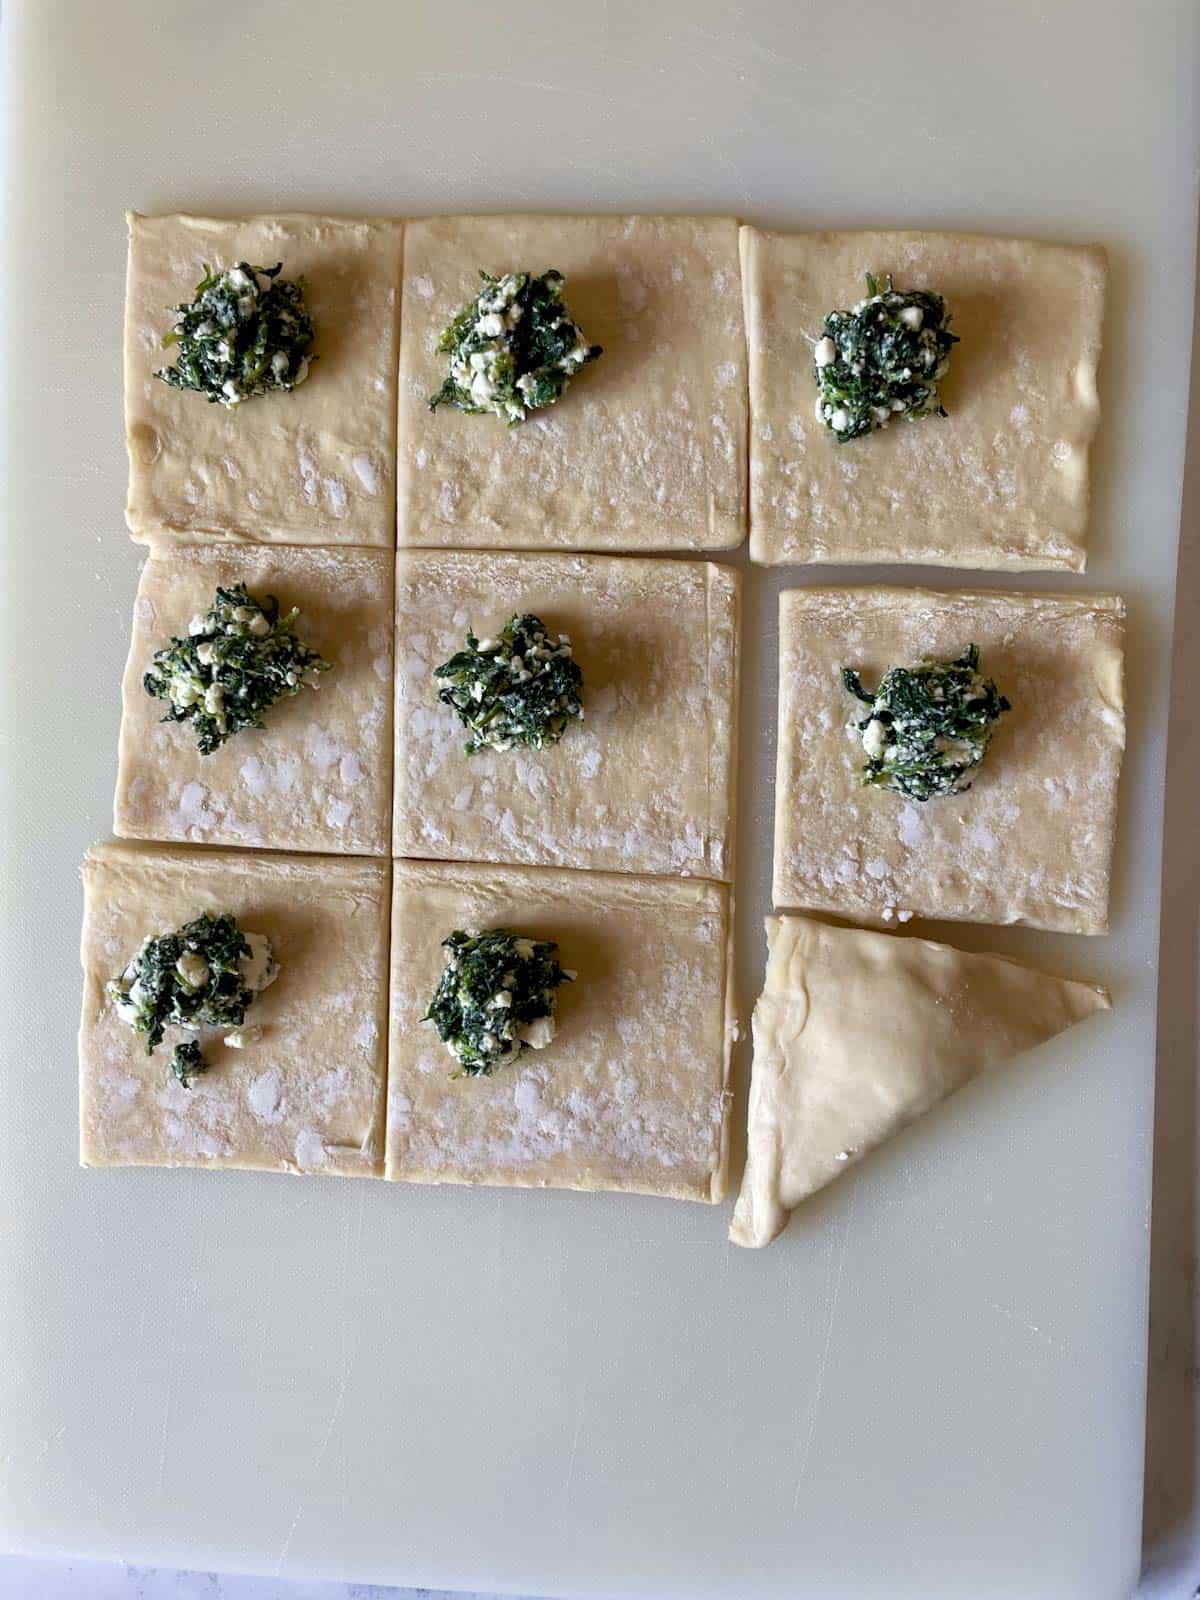 Puff pastry dough cut into squares with a teaspoon of spinach and feta filling.